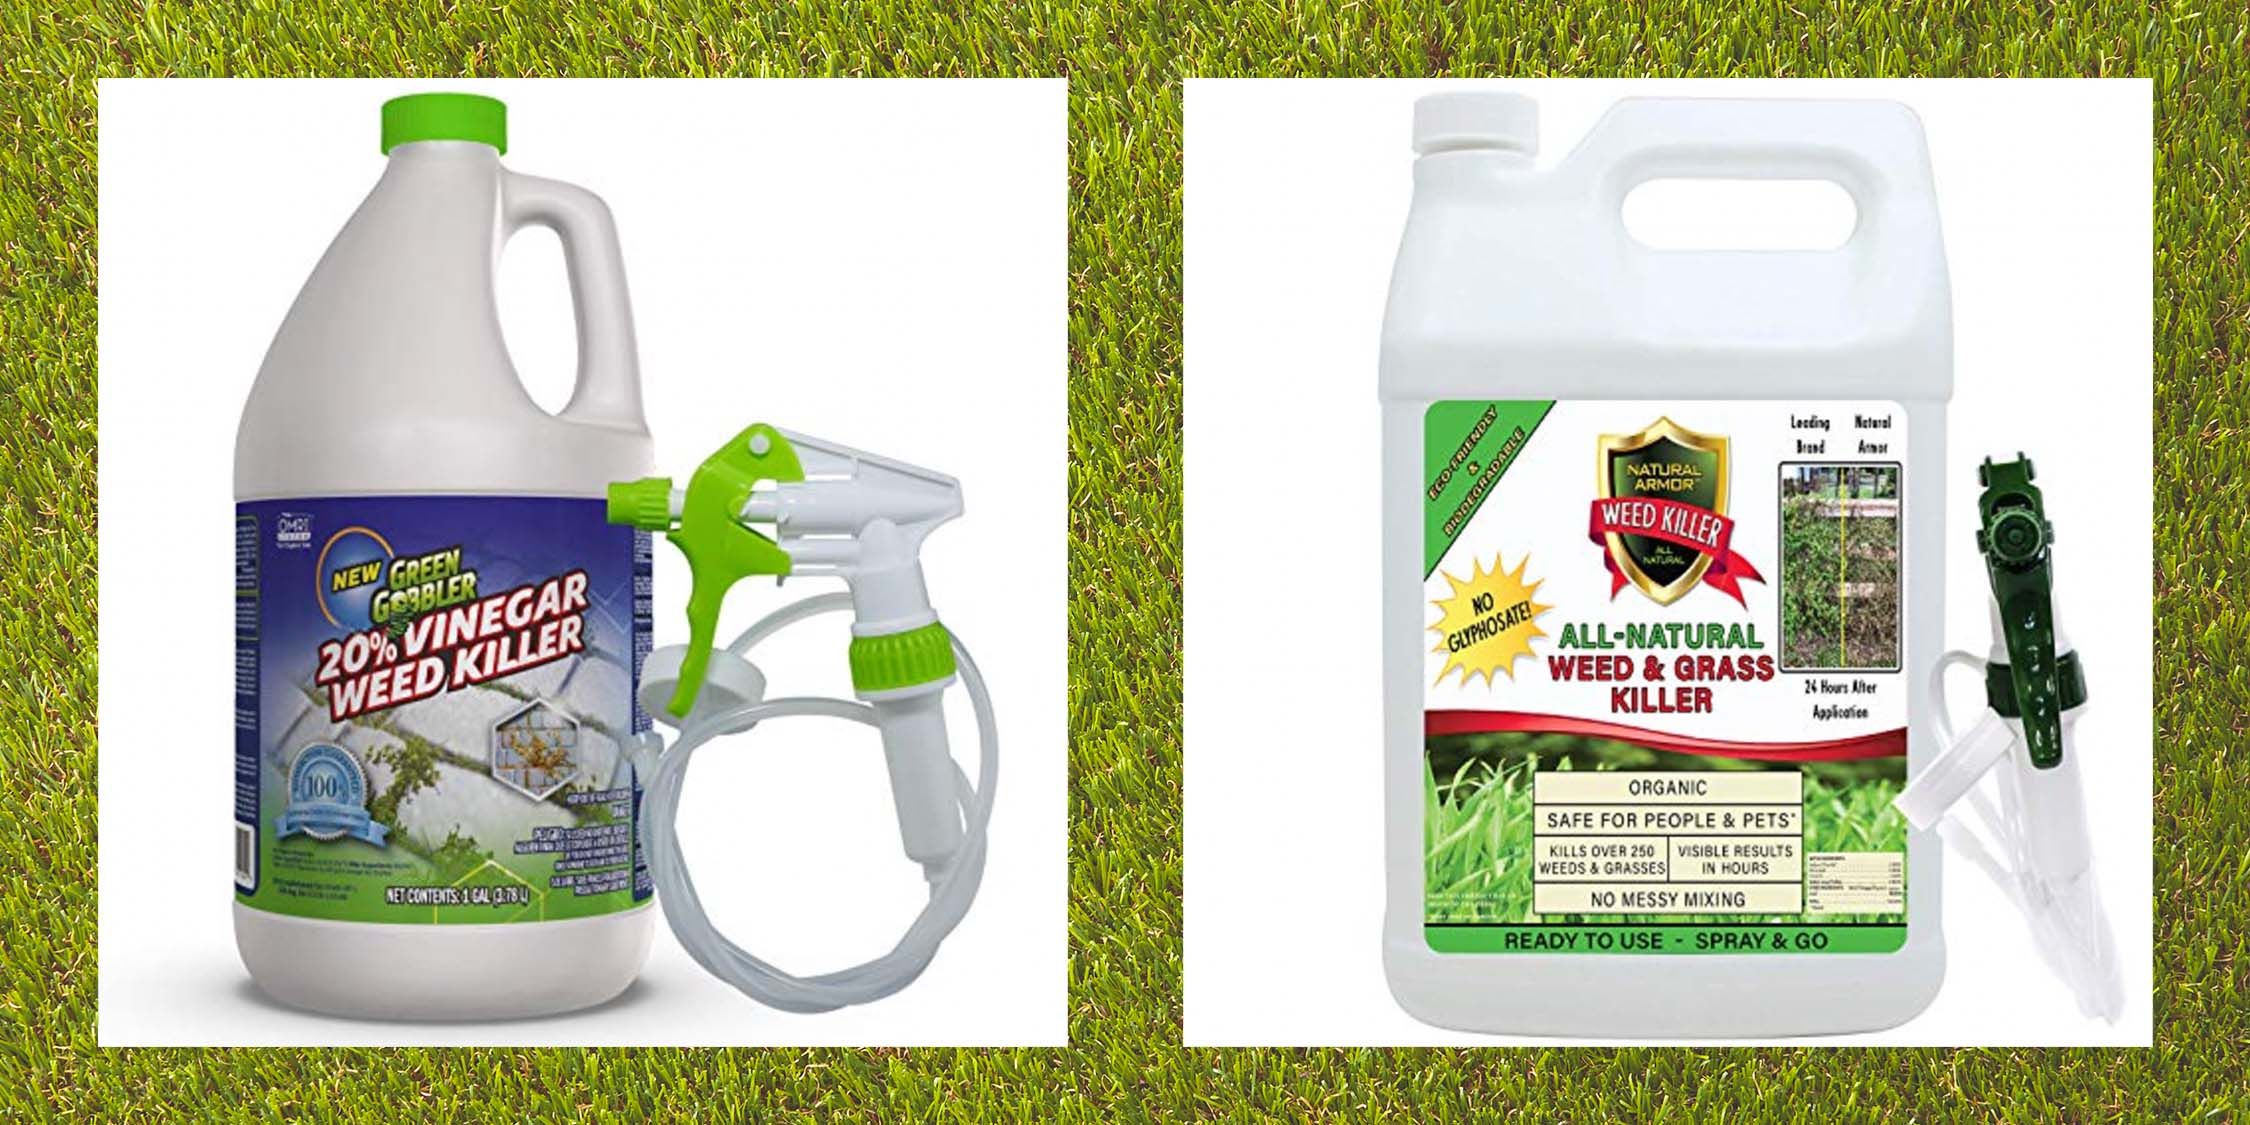 Image of Natural Armor Weed & Grass Killer on Pinterest